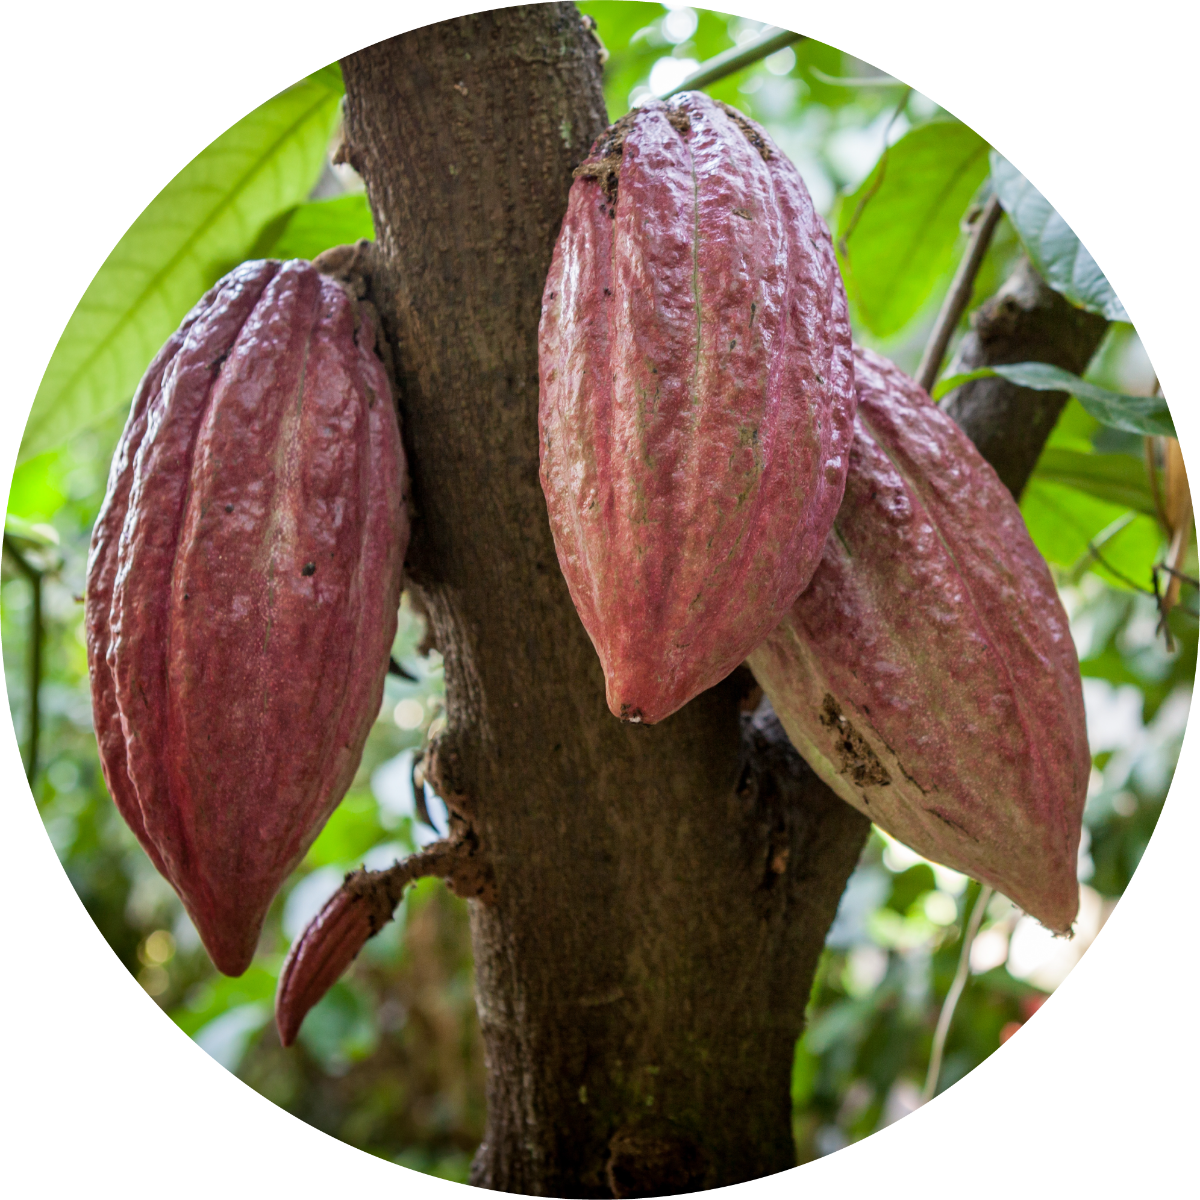 Cacao Extract